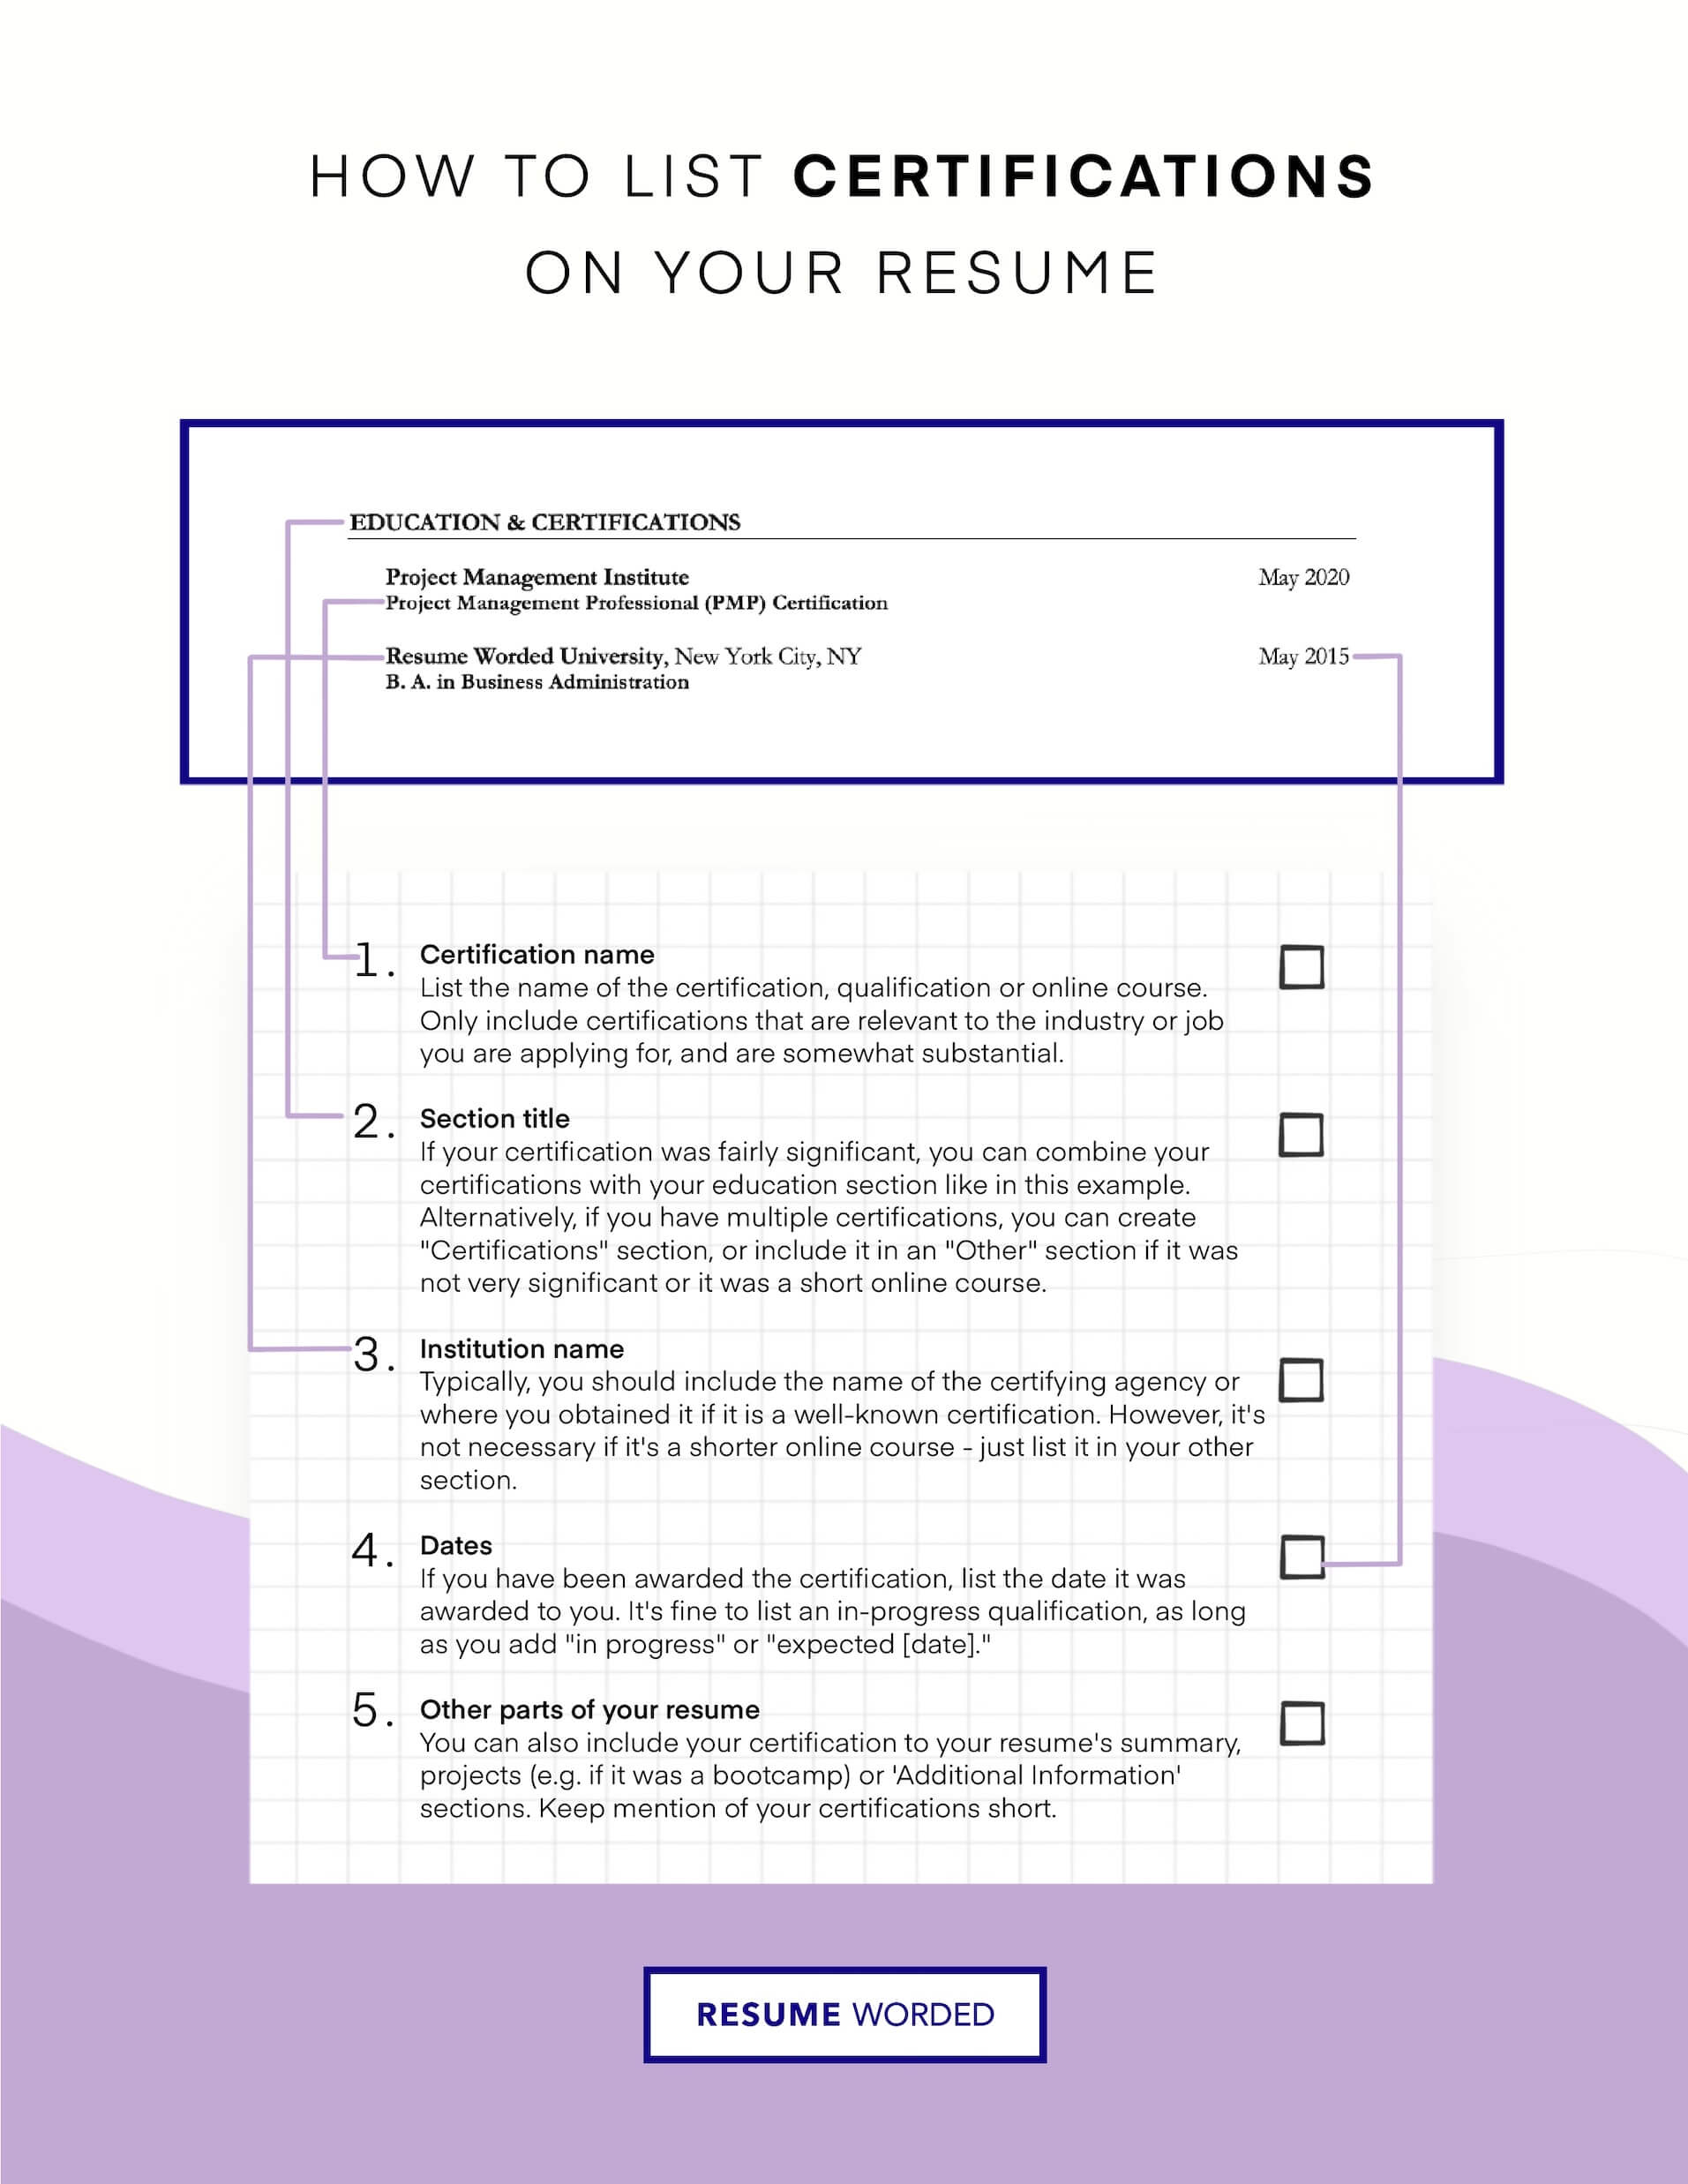 Display relevant certifications - Cyber Security Consultant Resume